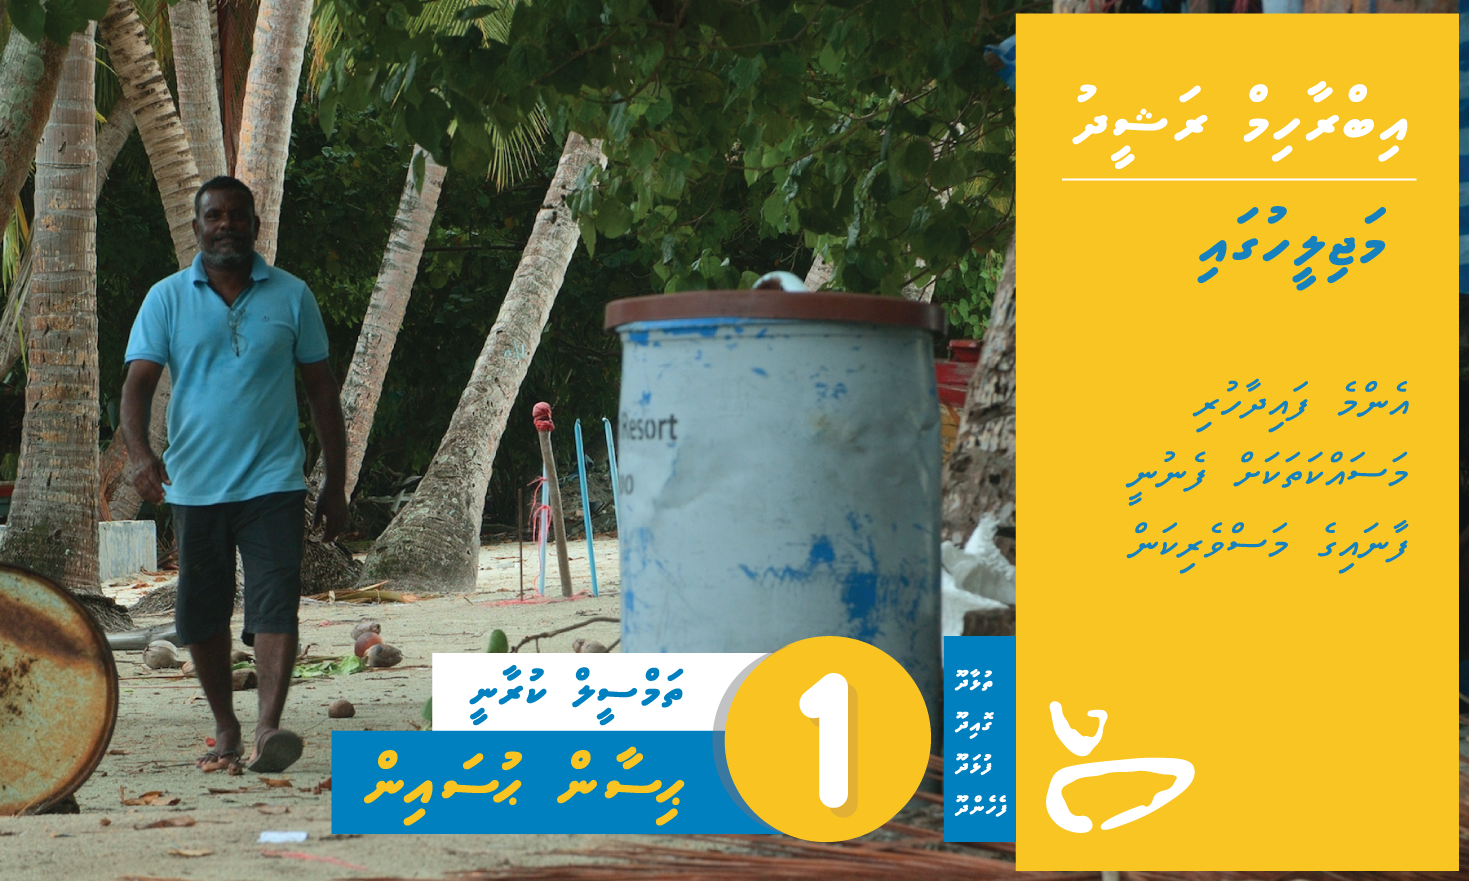 Constituent_Fulhadhoo_Faana.png